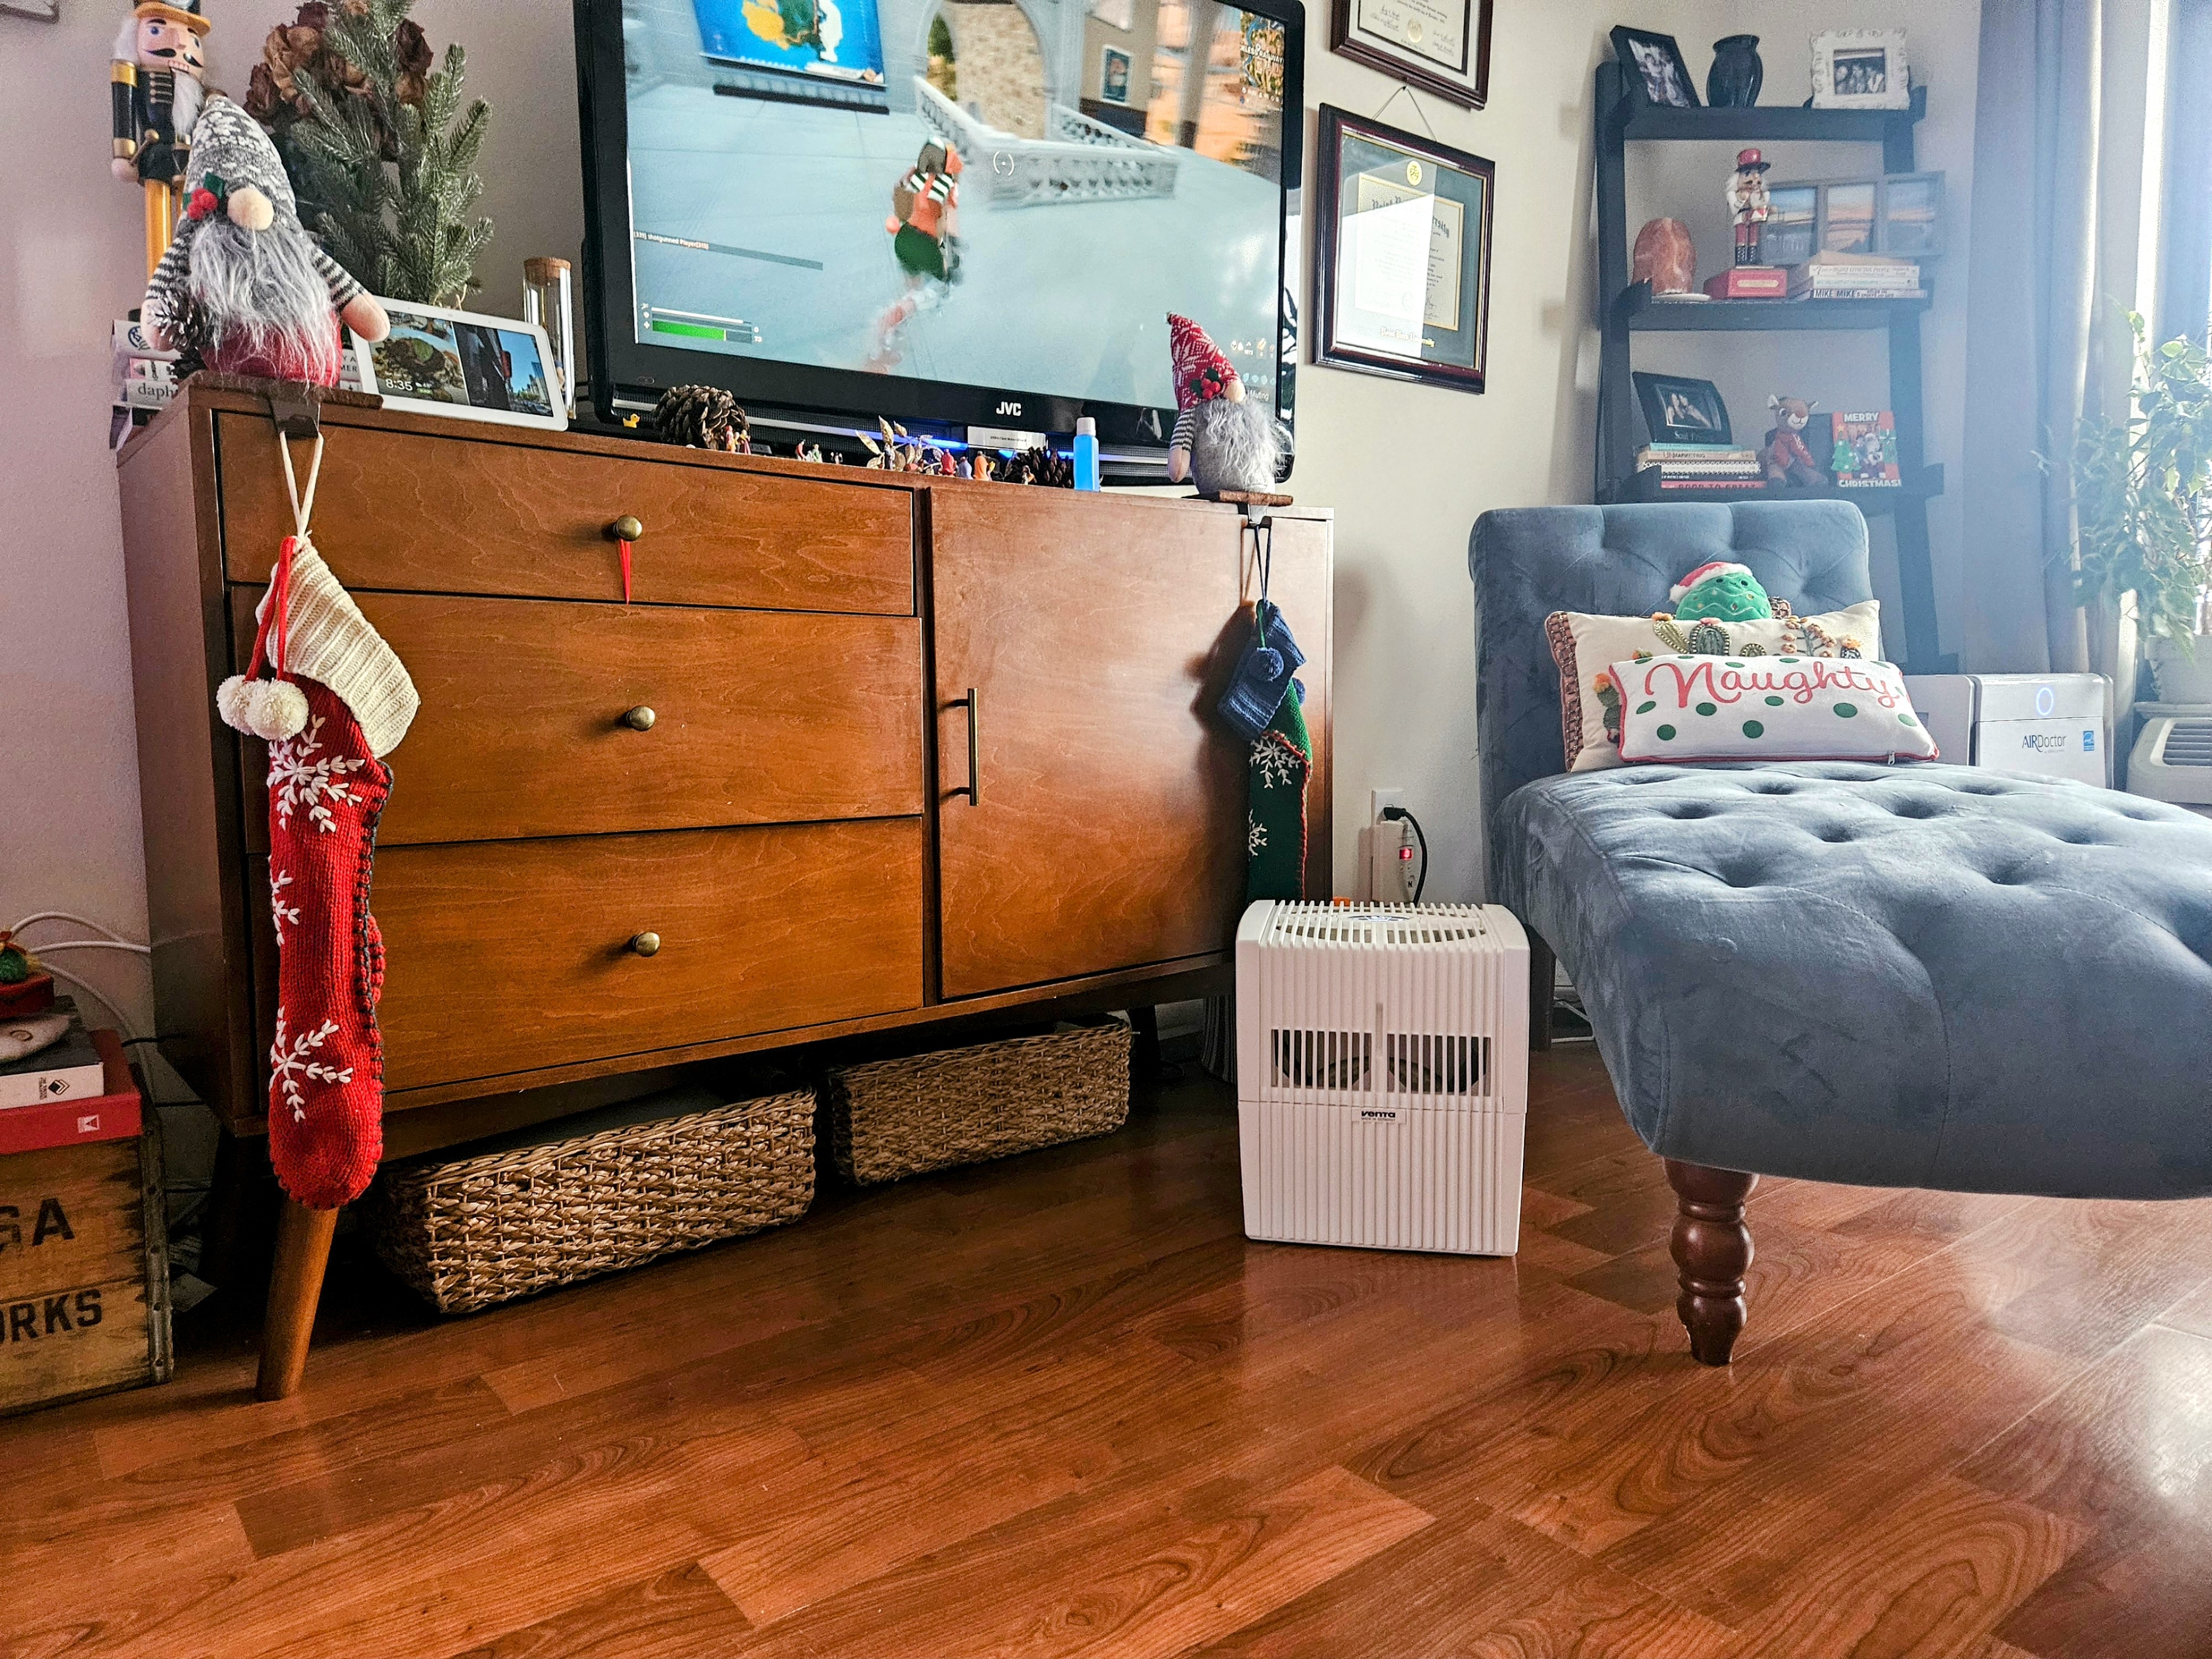 photo of living room with Christmas decorations and a humidifer on the floor in front the stand with a television on it.